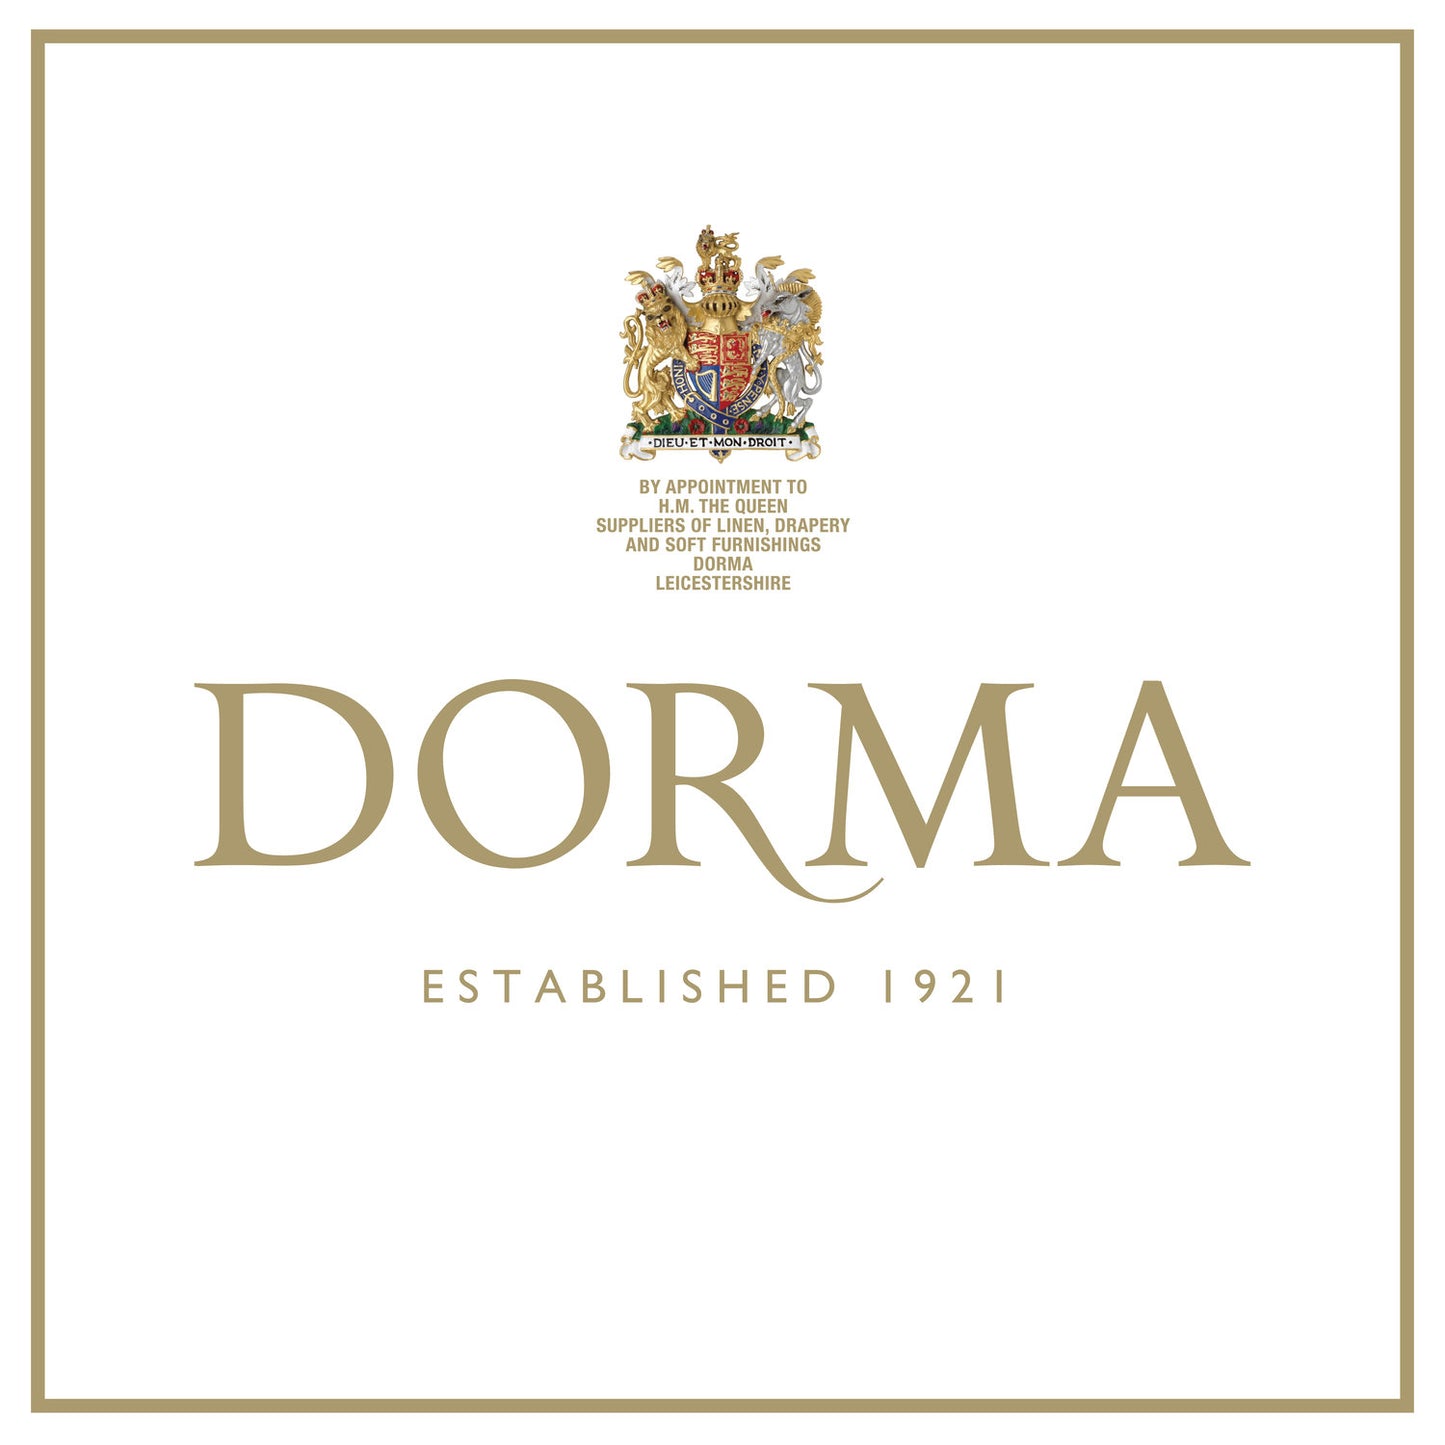 Sheets by Dorma